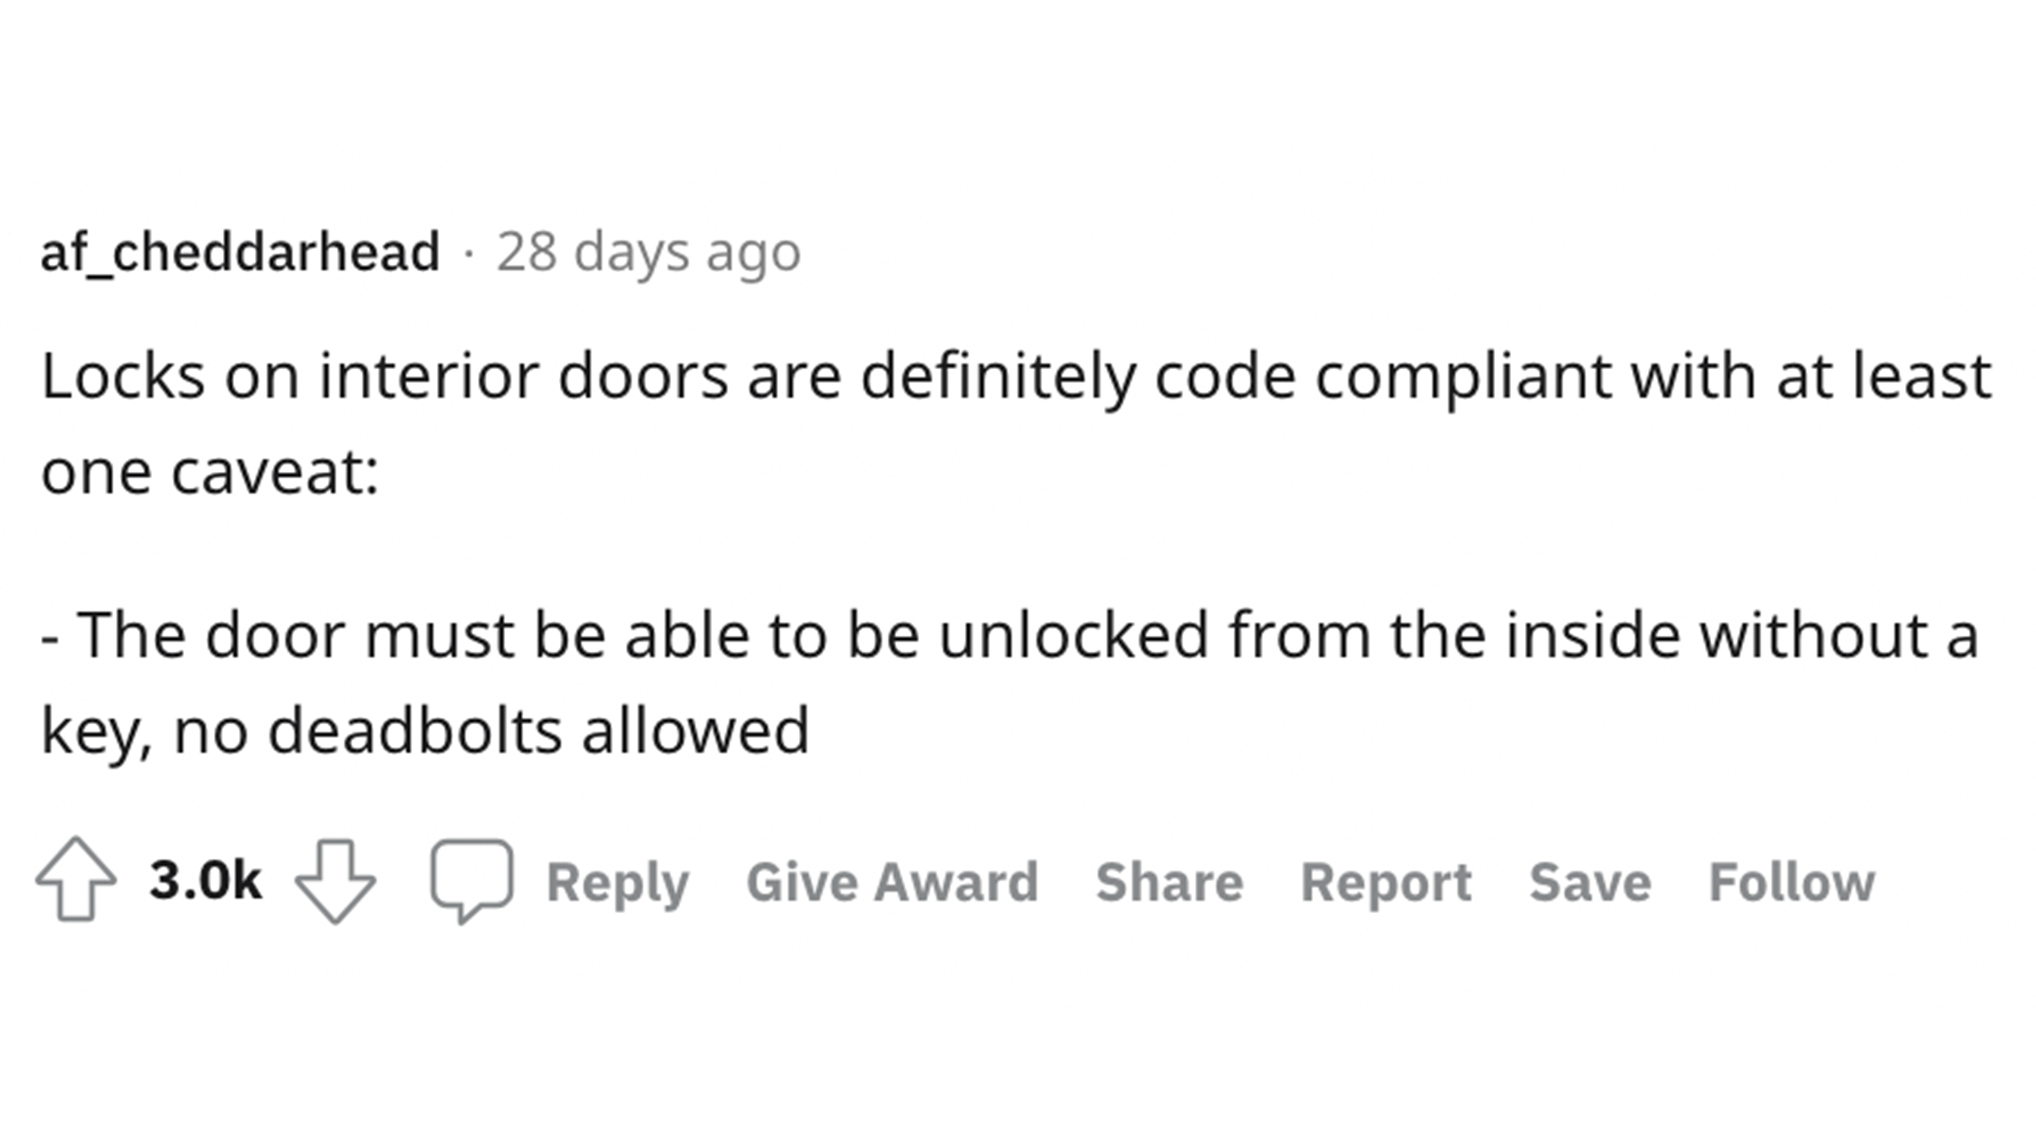 Tenant Tells Off Landlord - Random variable - . af_cheddarhead 28 days ago Locks on interior doors are definitely code compliant with at least one caveat The door must be able to be unlocked from the inside without a key, no deadbolts allowed Give Award R